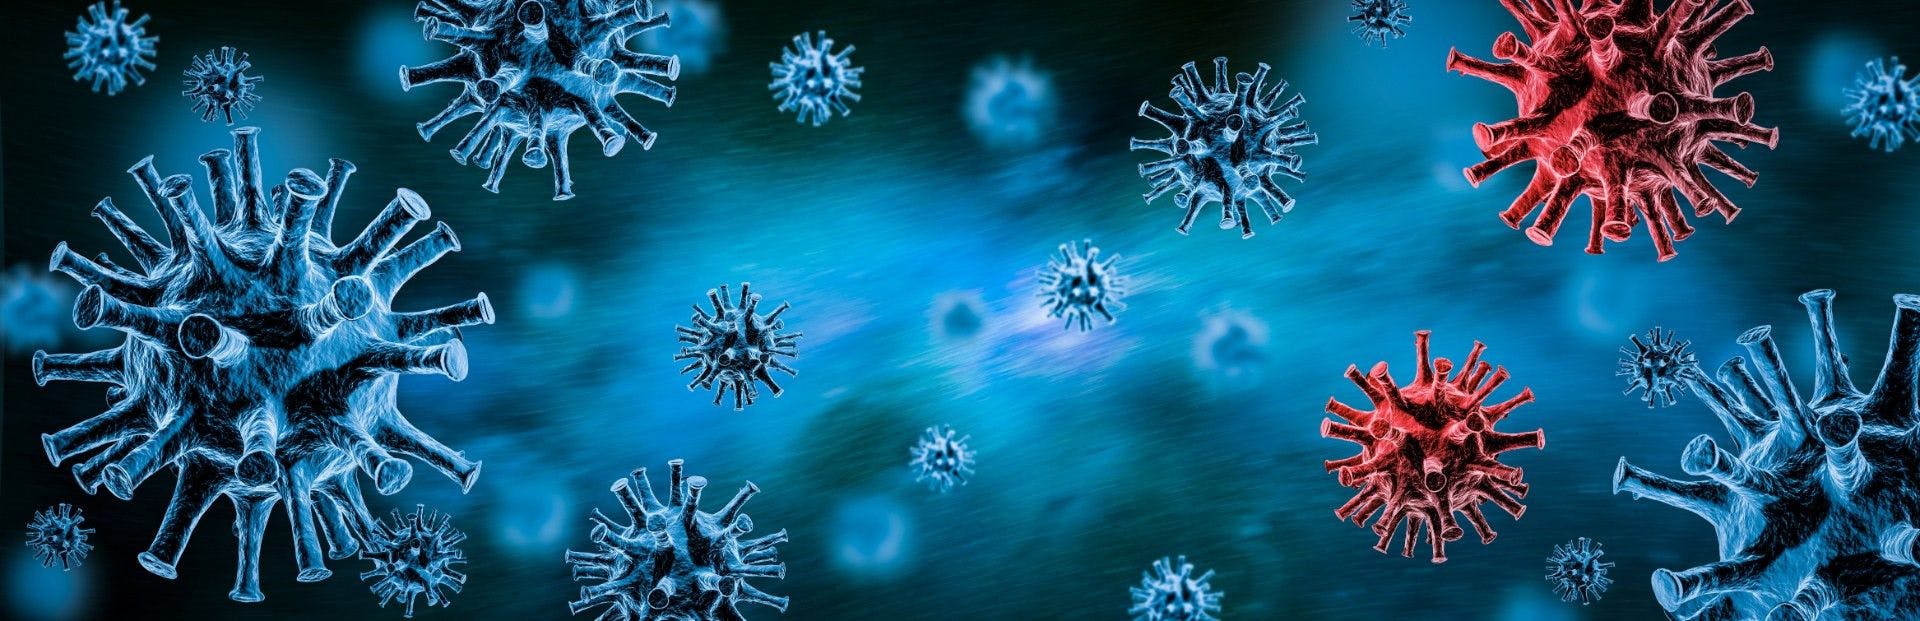 Influenza Season and COVID-19 – What Should We Expect?